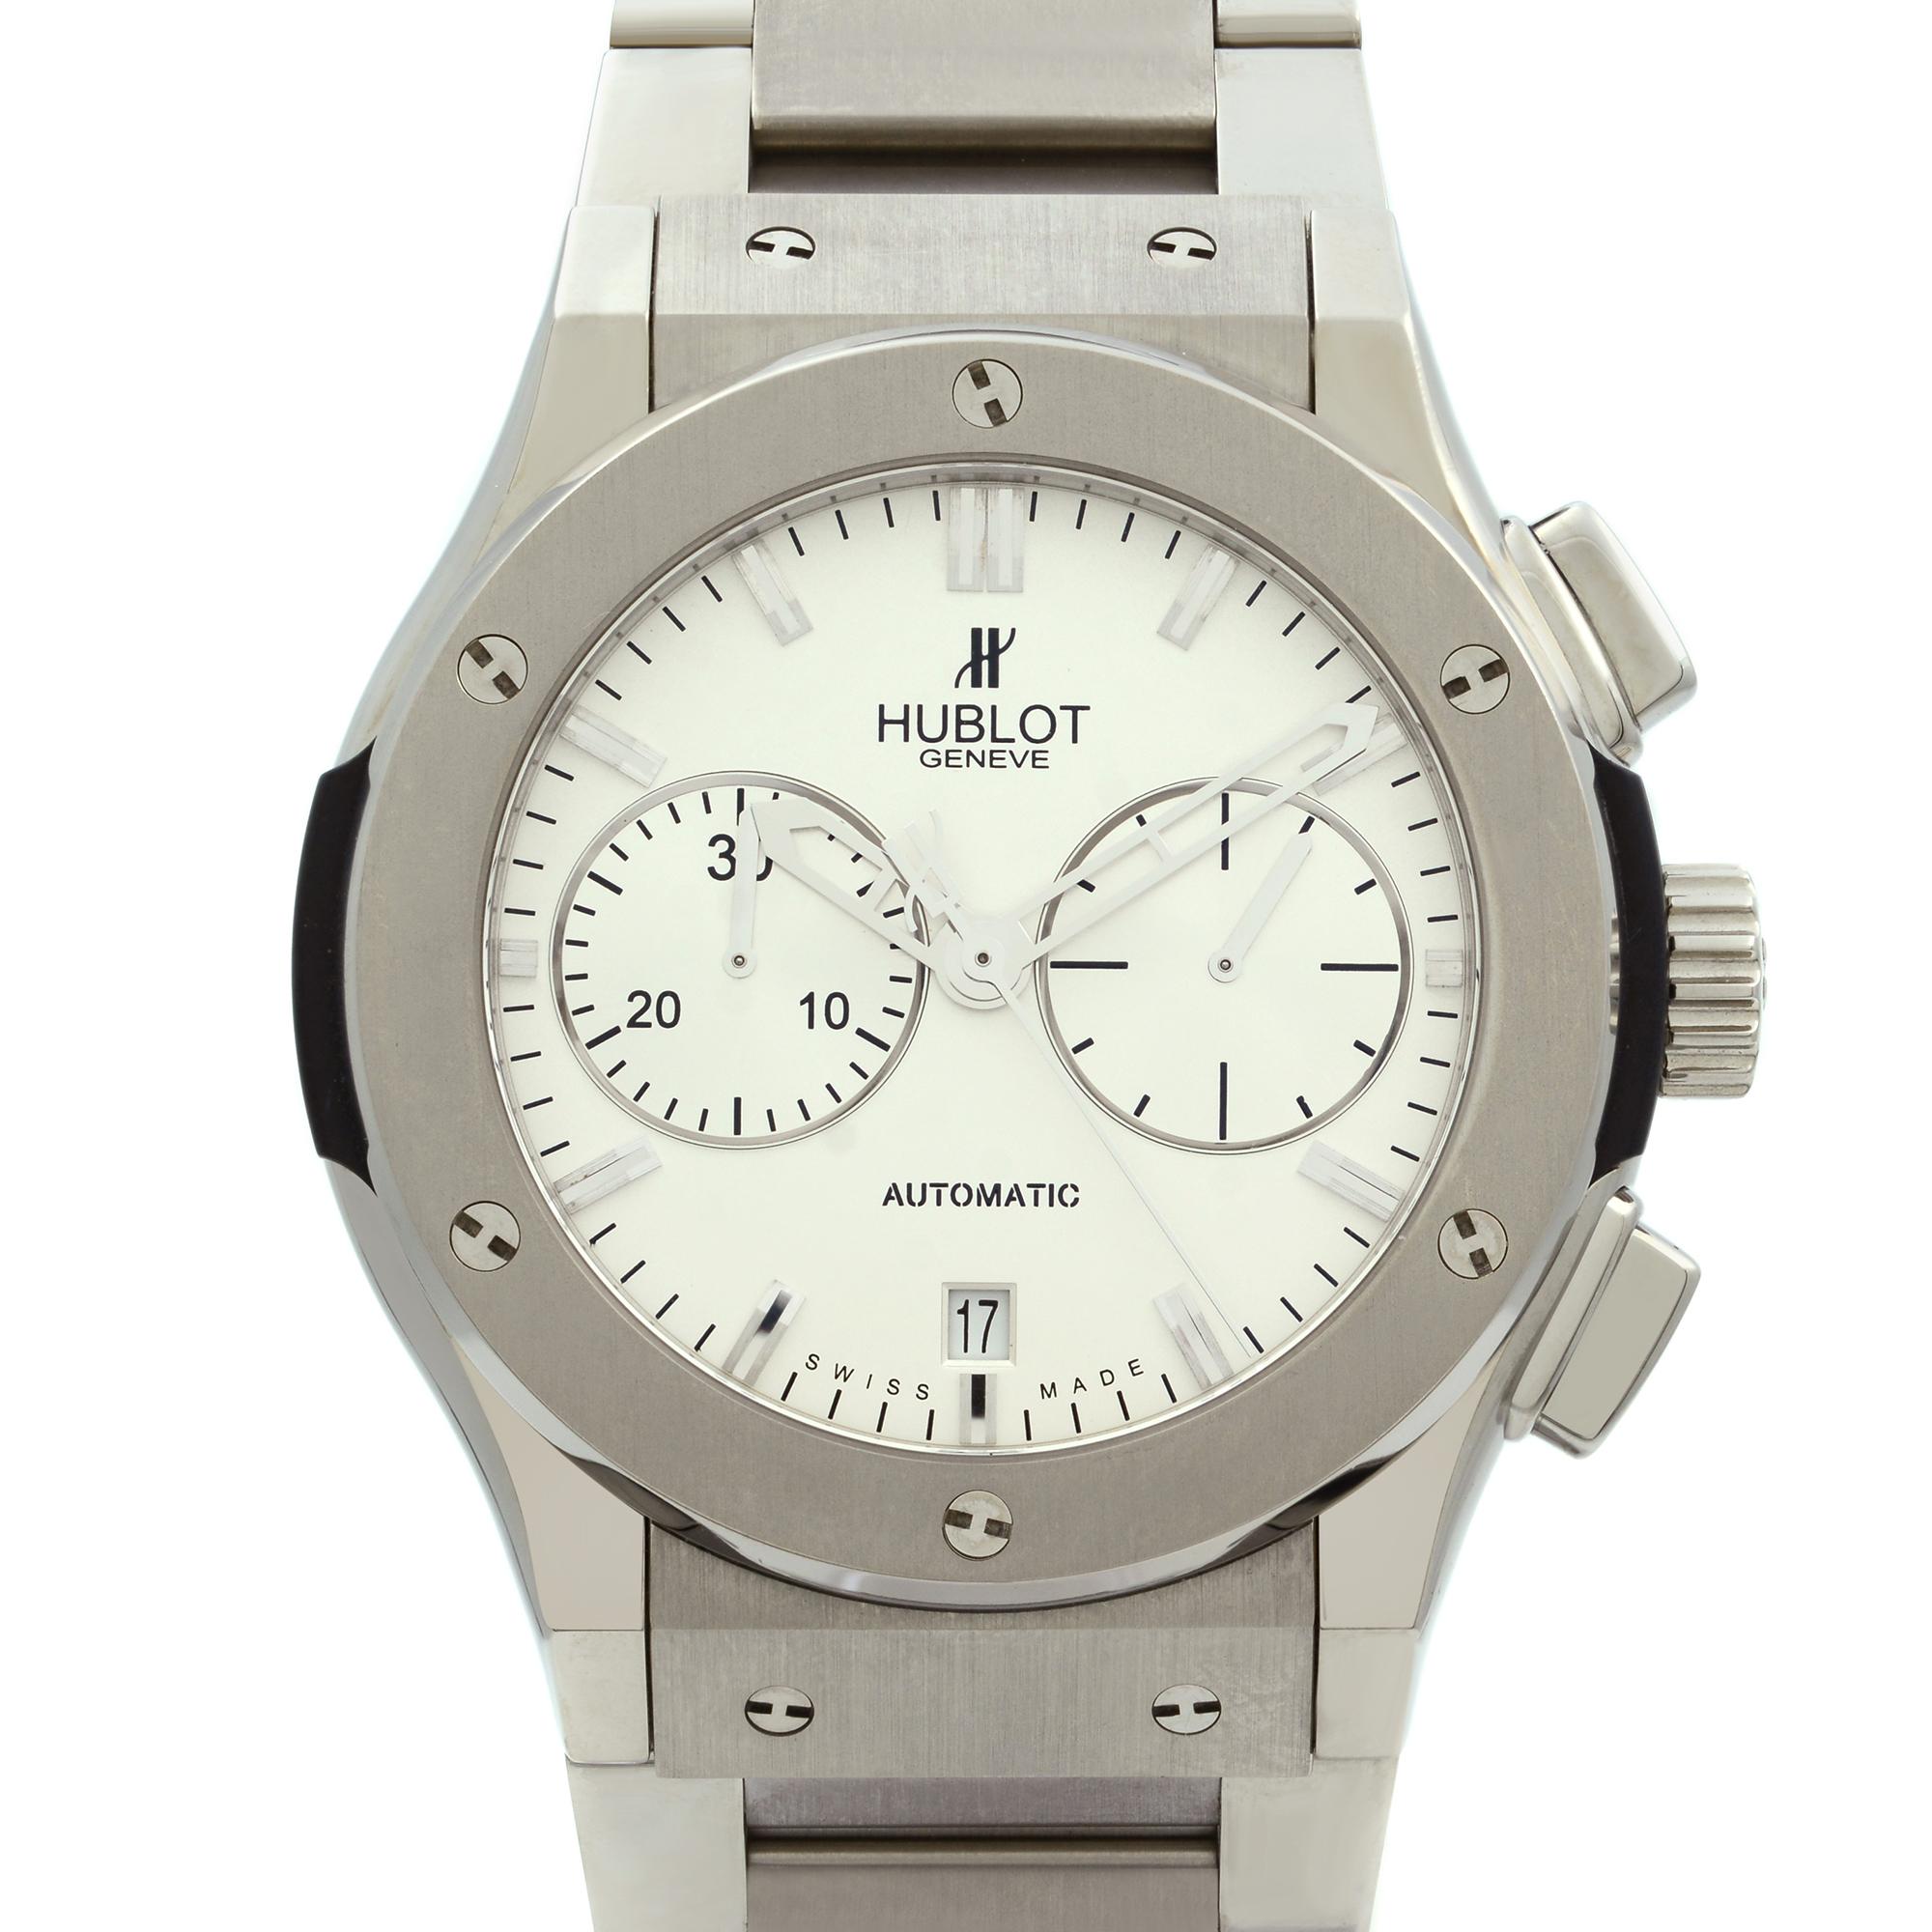 This watch is in flawless display model condition. Titanium Band With Stainless Steel Clasp. Comes with Original Box and Papers. Covered By 3 Year Chronostore Warranty.
Details:
MSRP 13100
Model Number 521.NX.2610.RX
Brand Hublot
Department